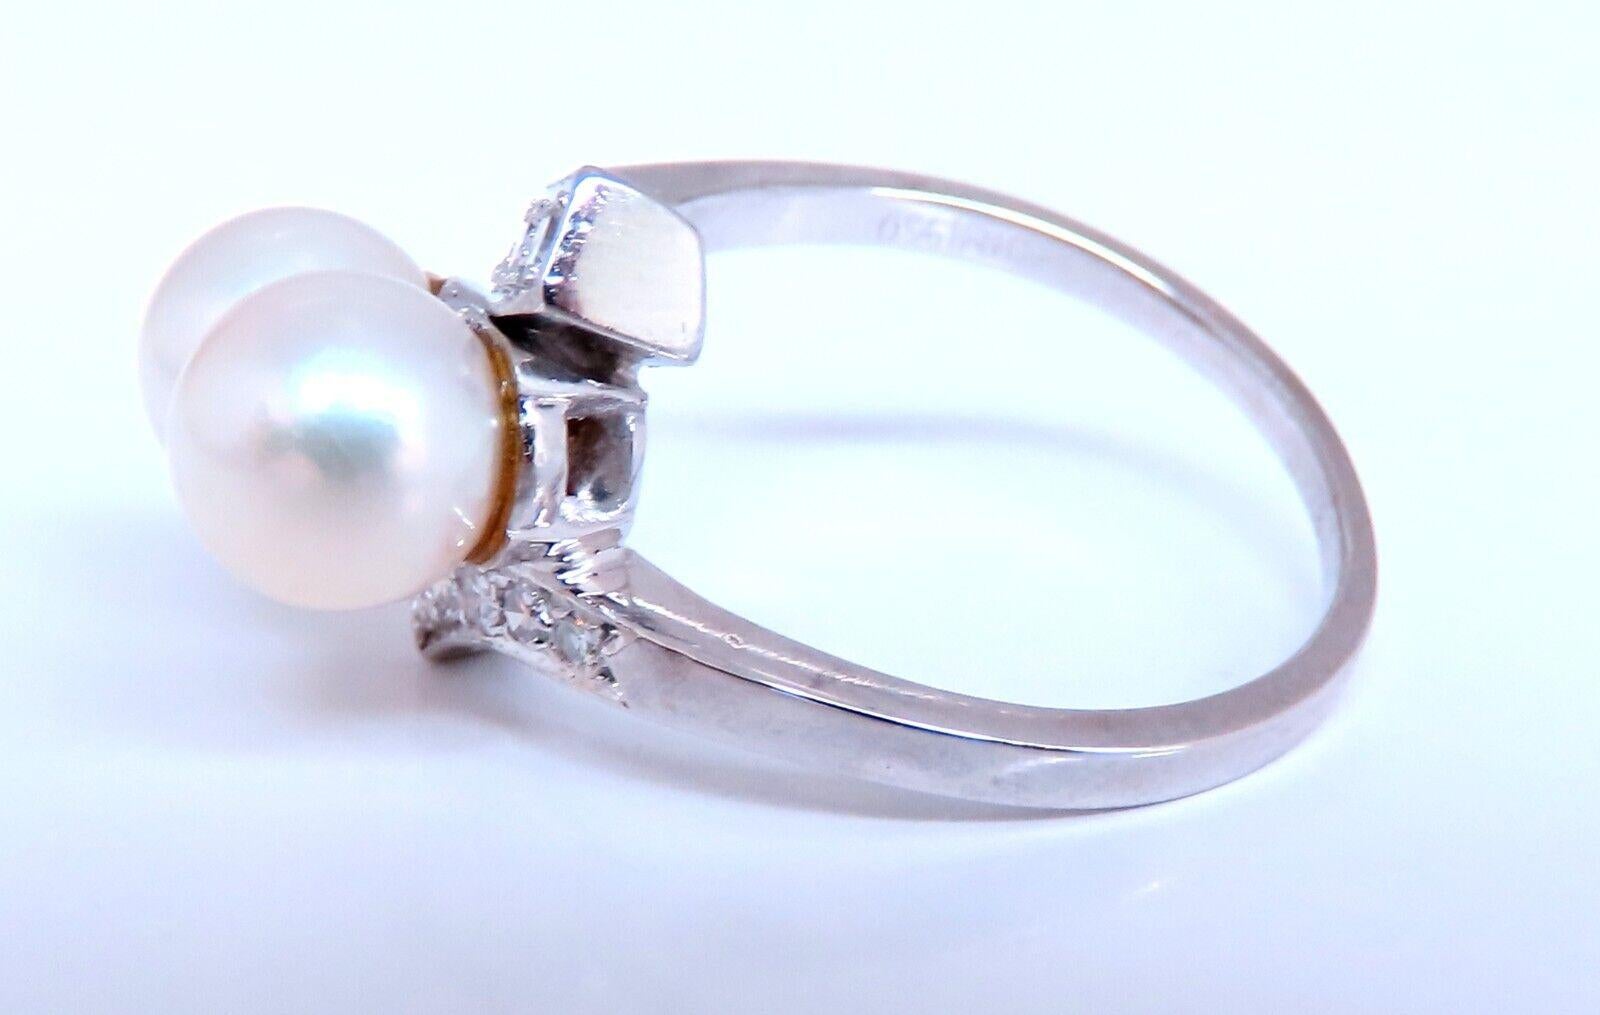 6.5mm Natural Fresh water pearl Gold Ring

.25ct Natural Round Diamonds

14kt. white gold

4.3 grams.

Current ring size: 5.25

We may resize.

Depth of ring: 9.6mm